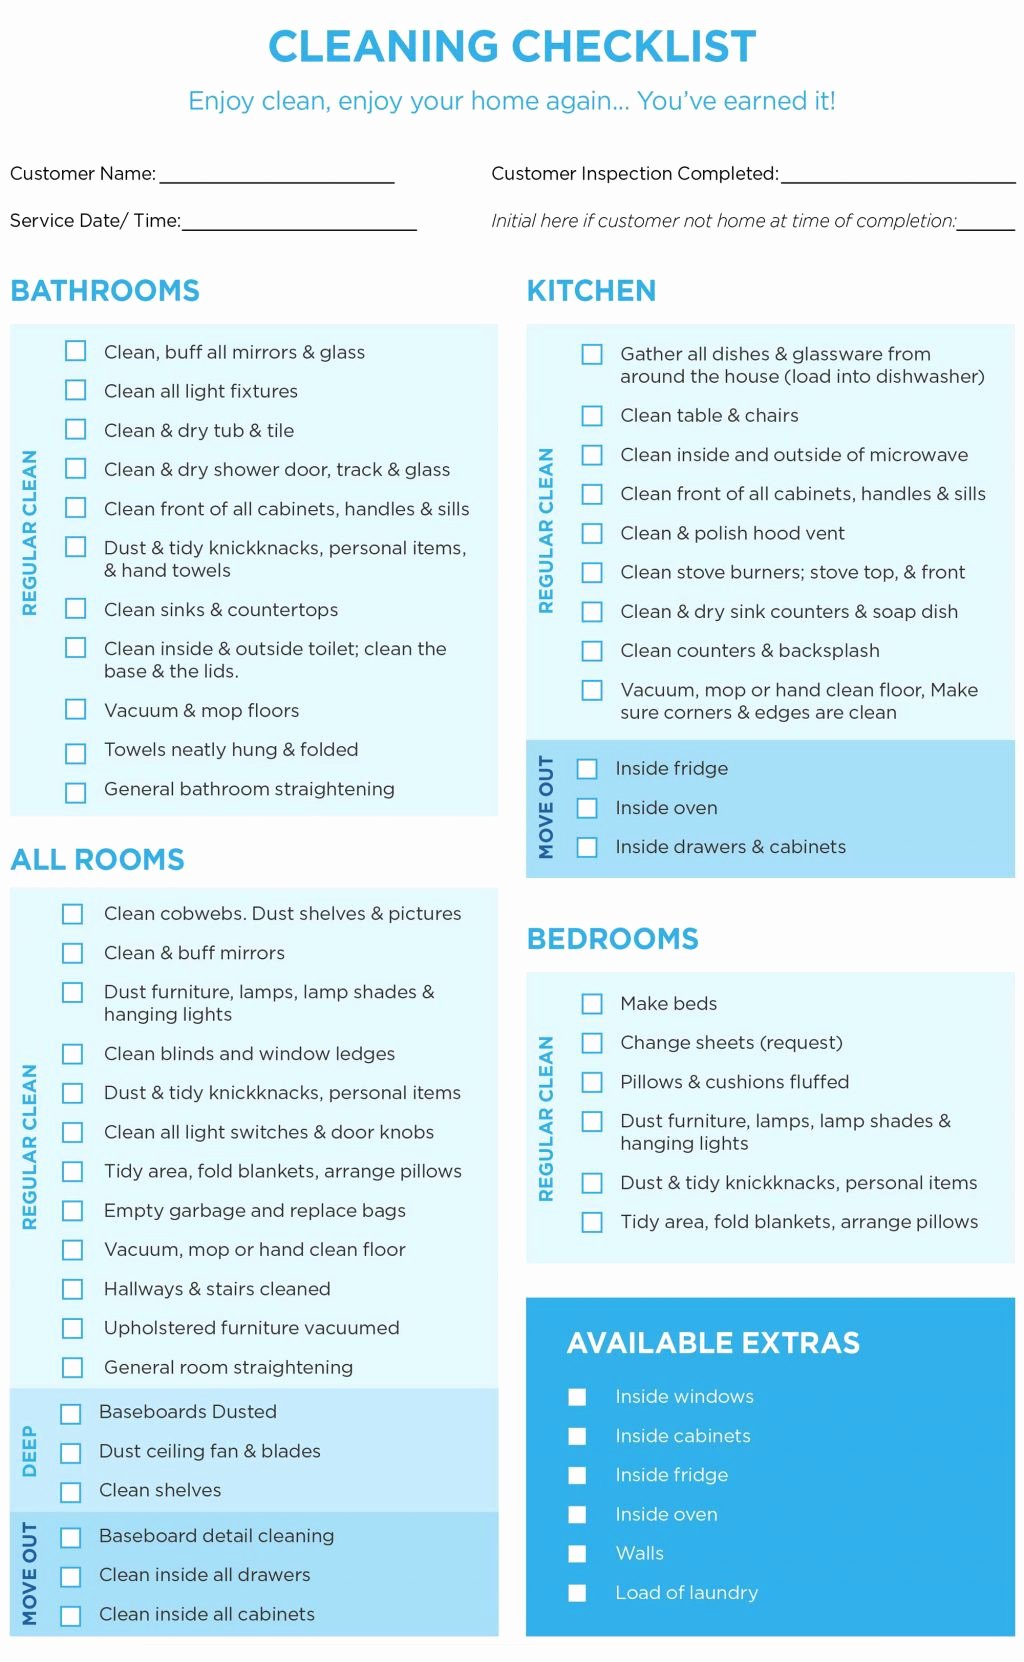 Commercial Cleaning Checklist Template Best Of 40 Helpful House Cleaning Checklists for You